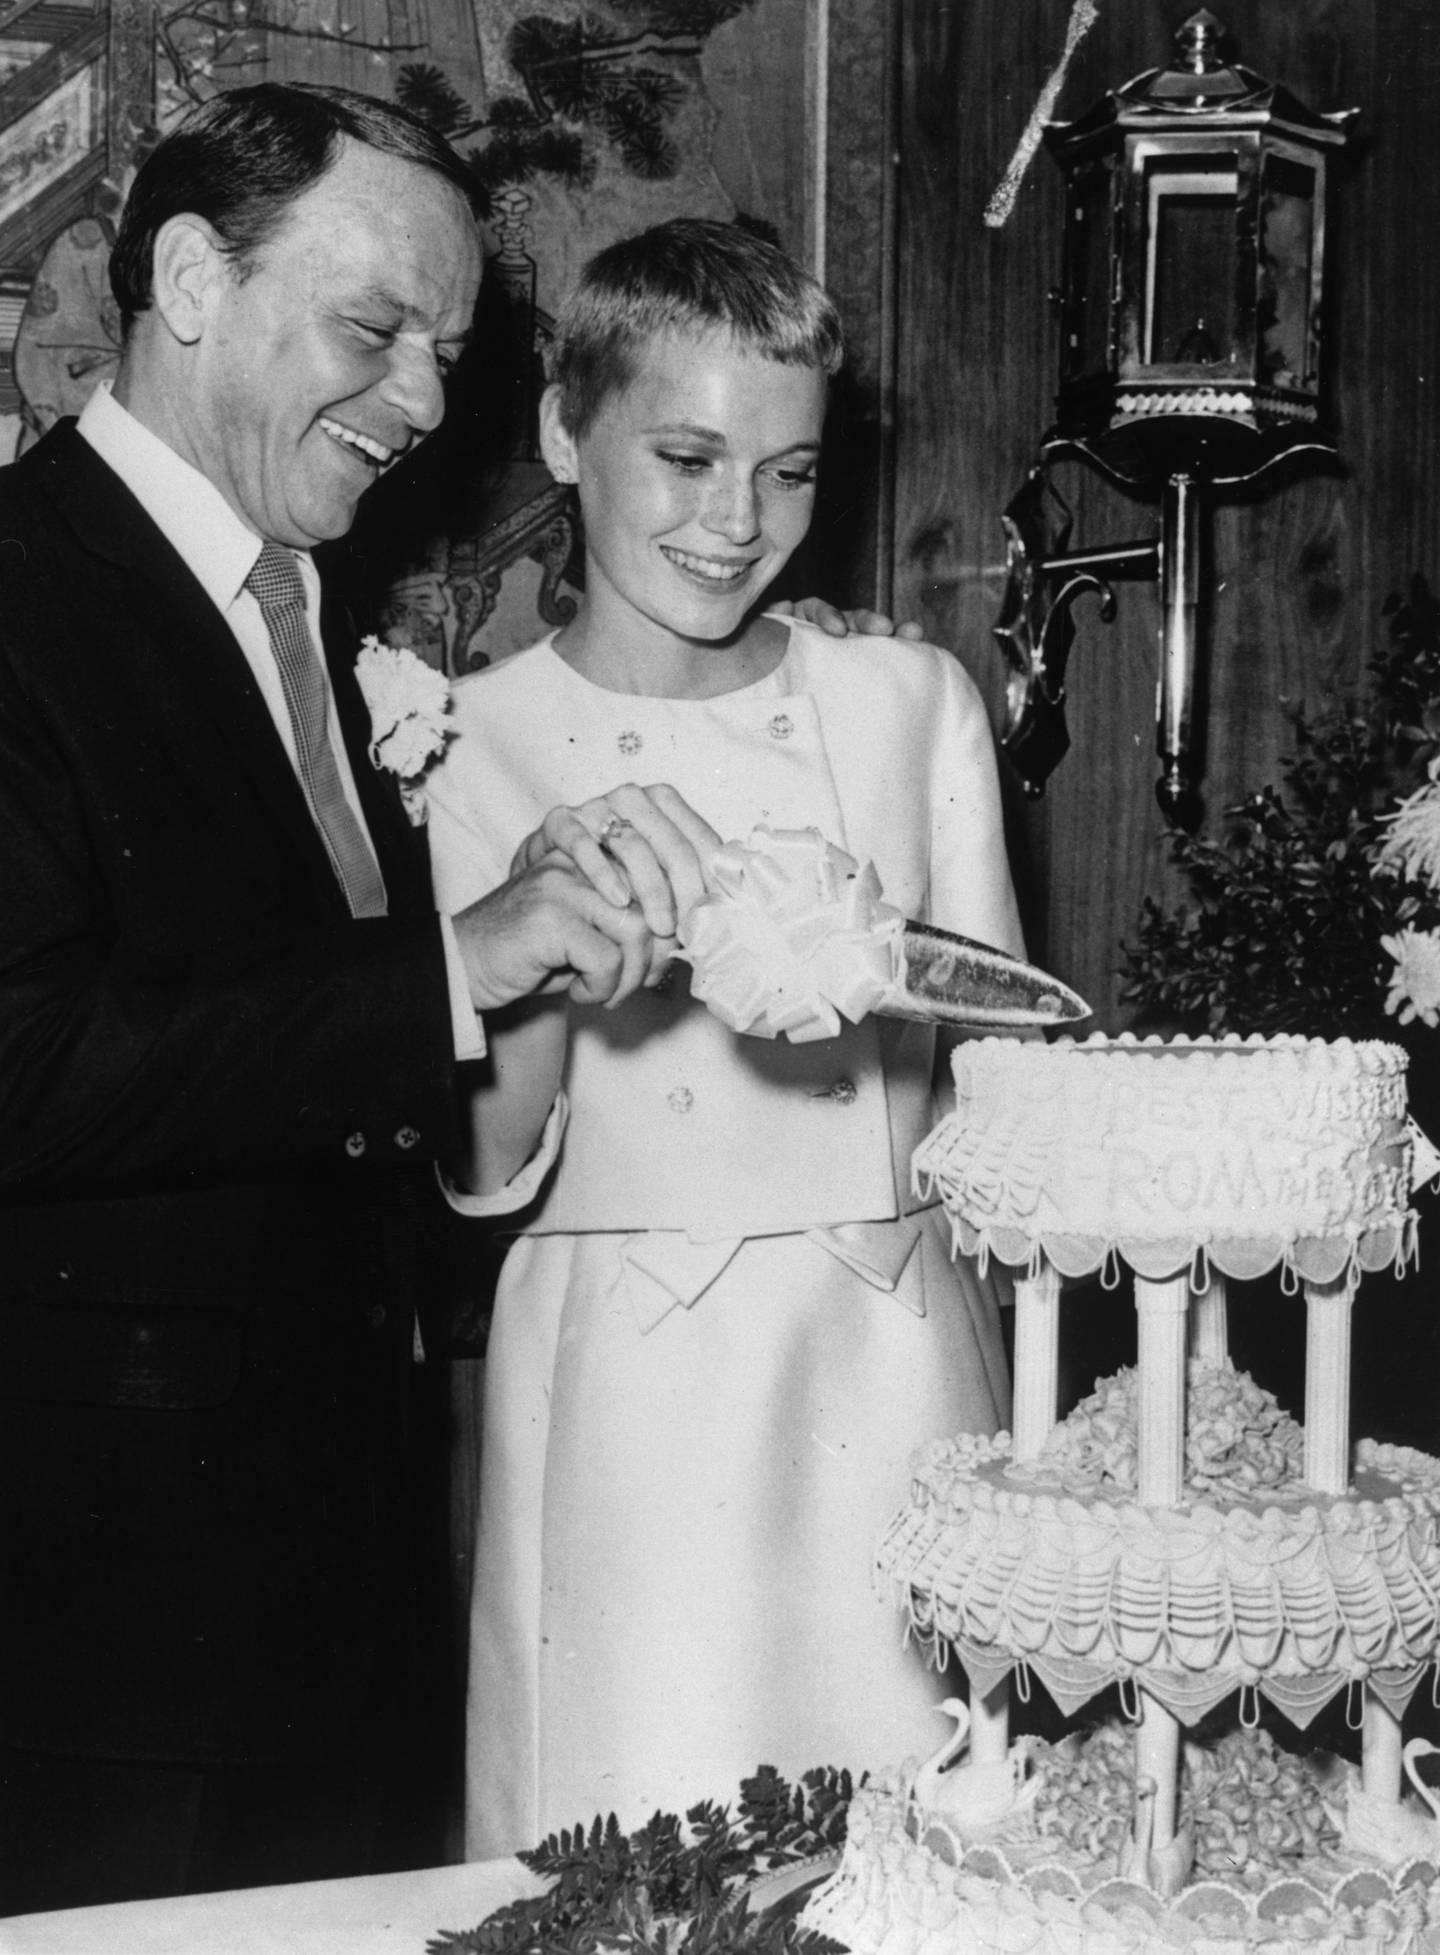 19th July 1966:  Singer Frank Sinatra and actress Mia Farrow cutting their wedding cake in Las Vegas.  Getty Images